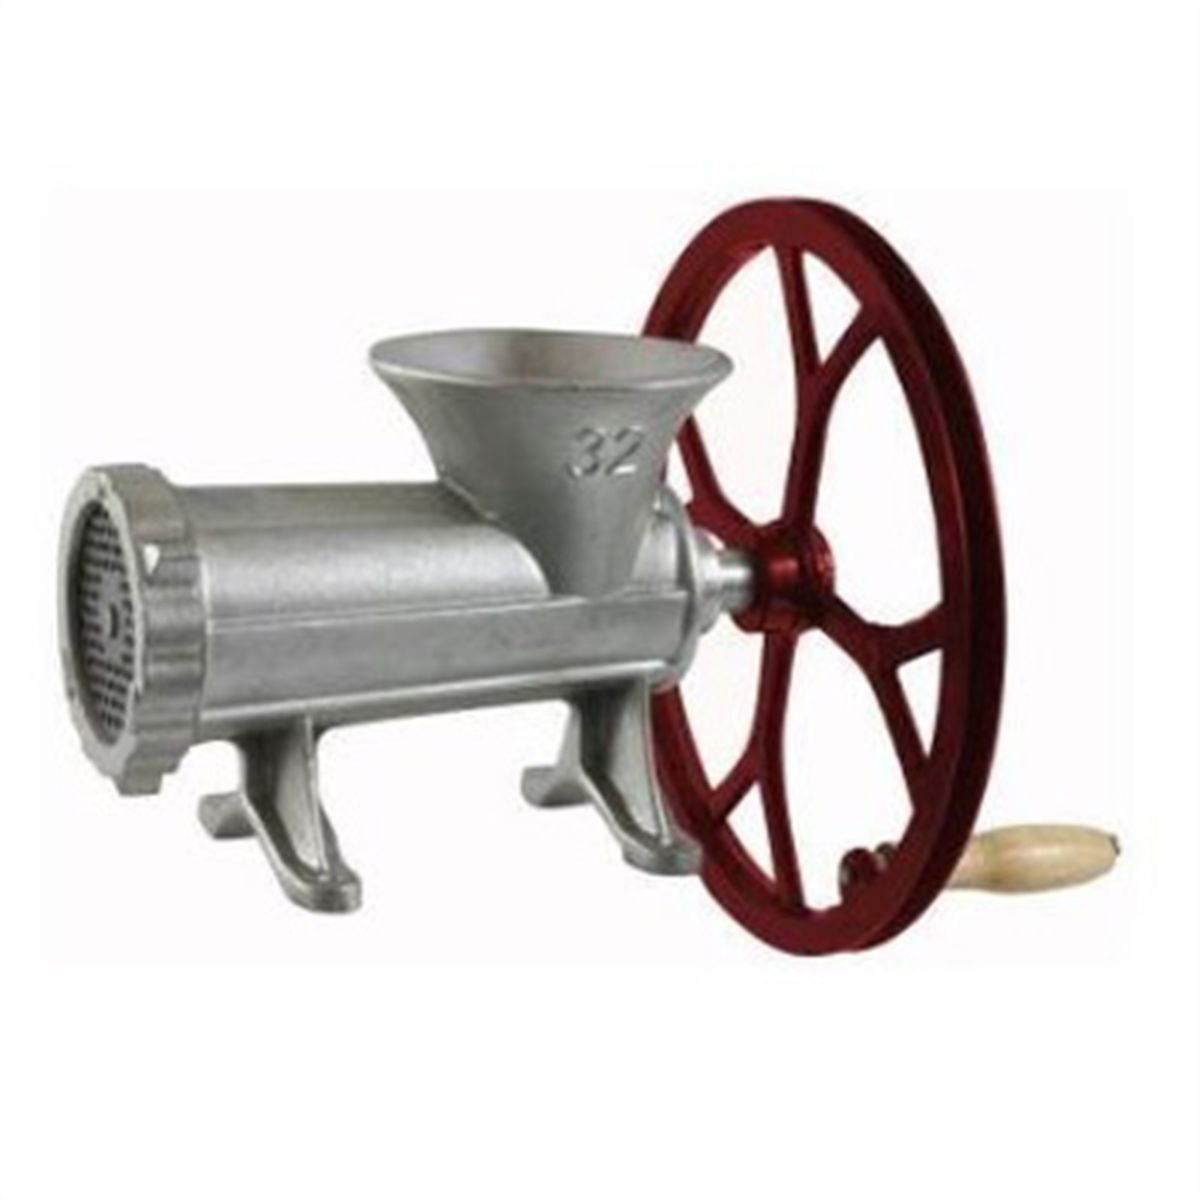 32 Meat Grinder with Pulley SM07528